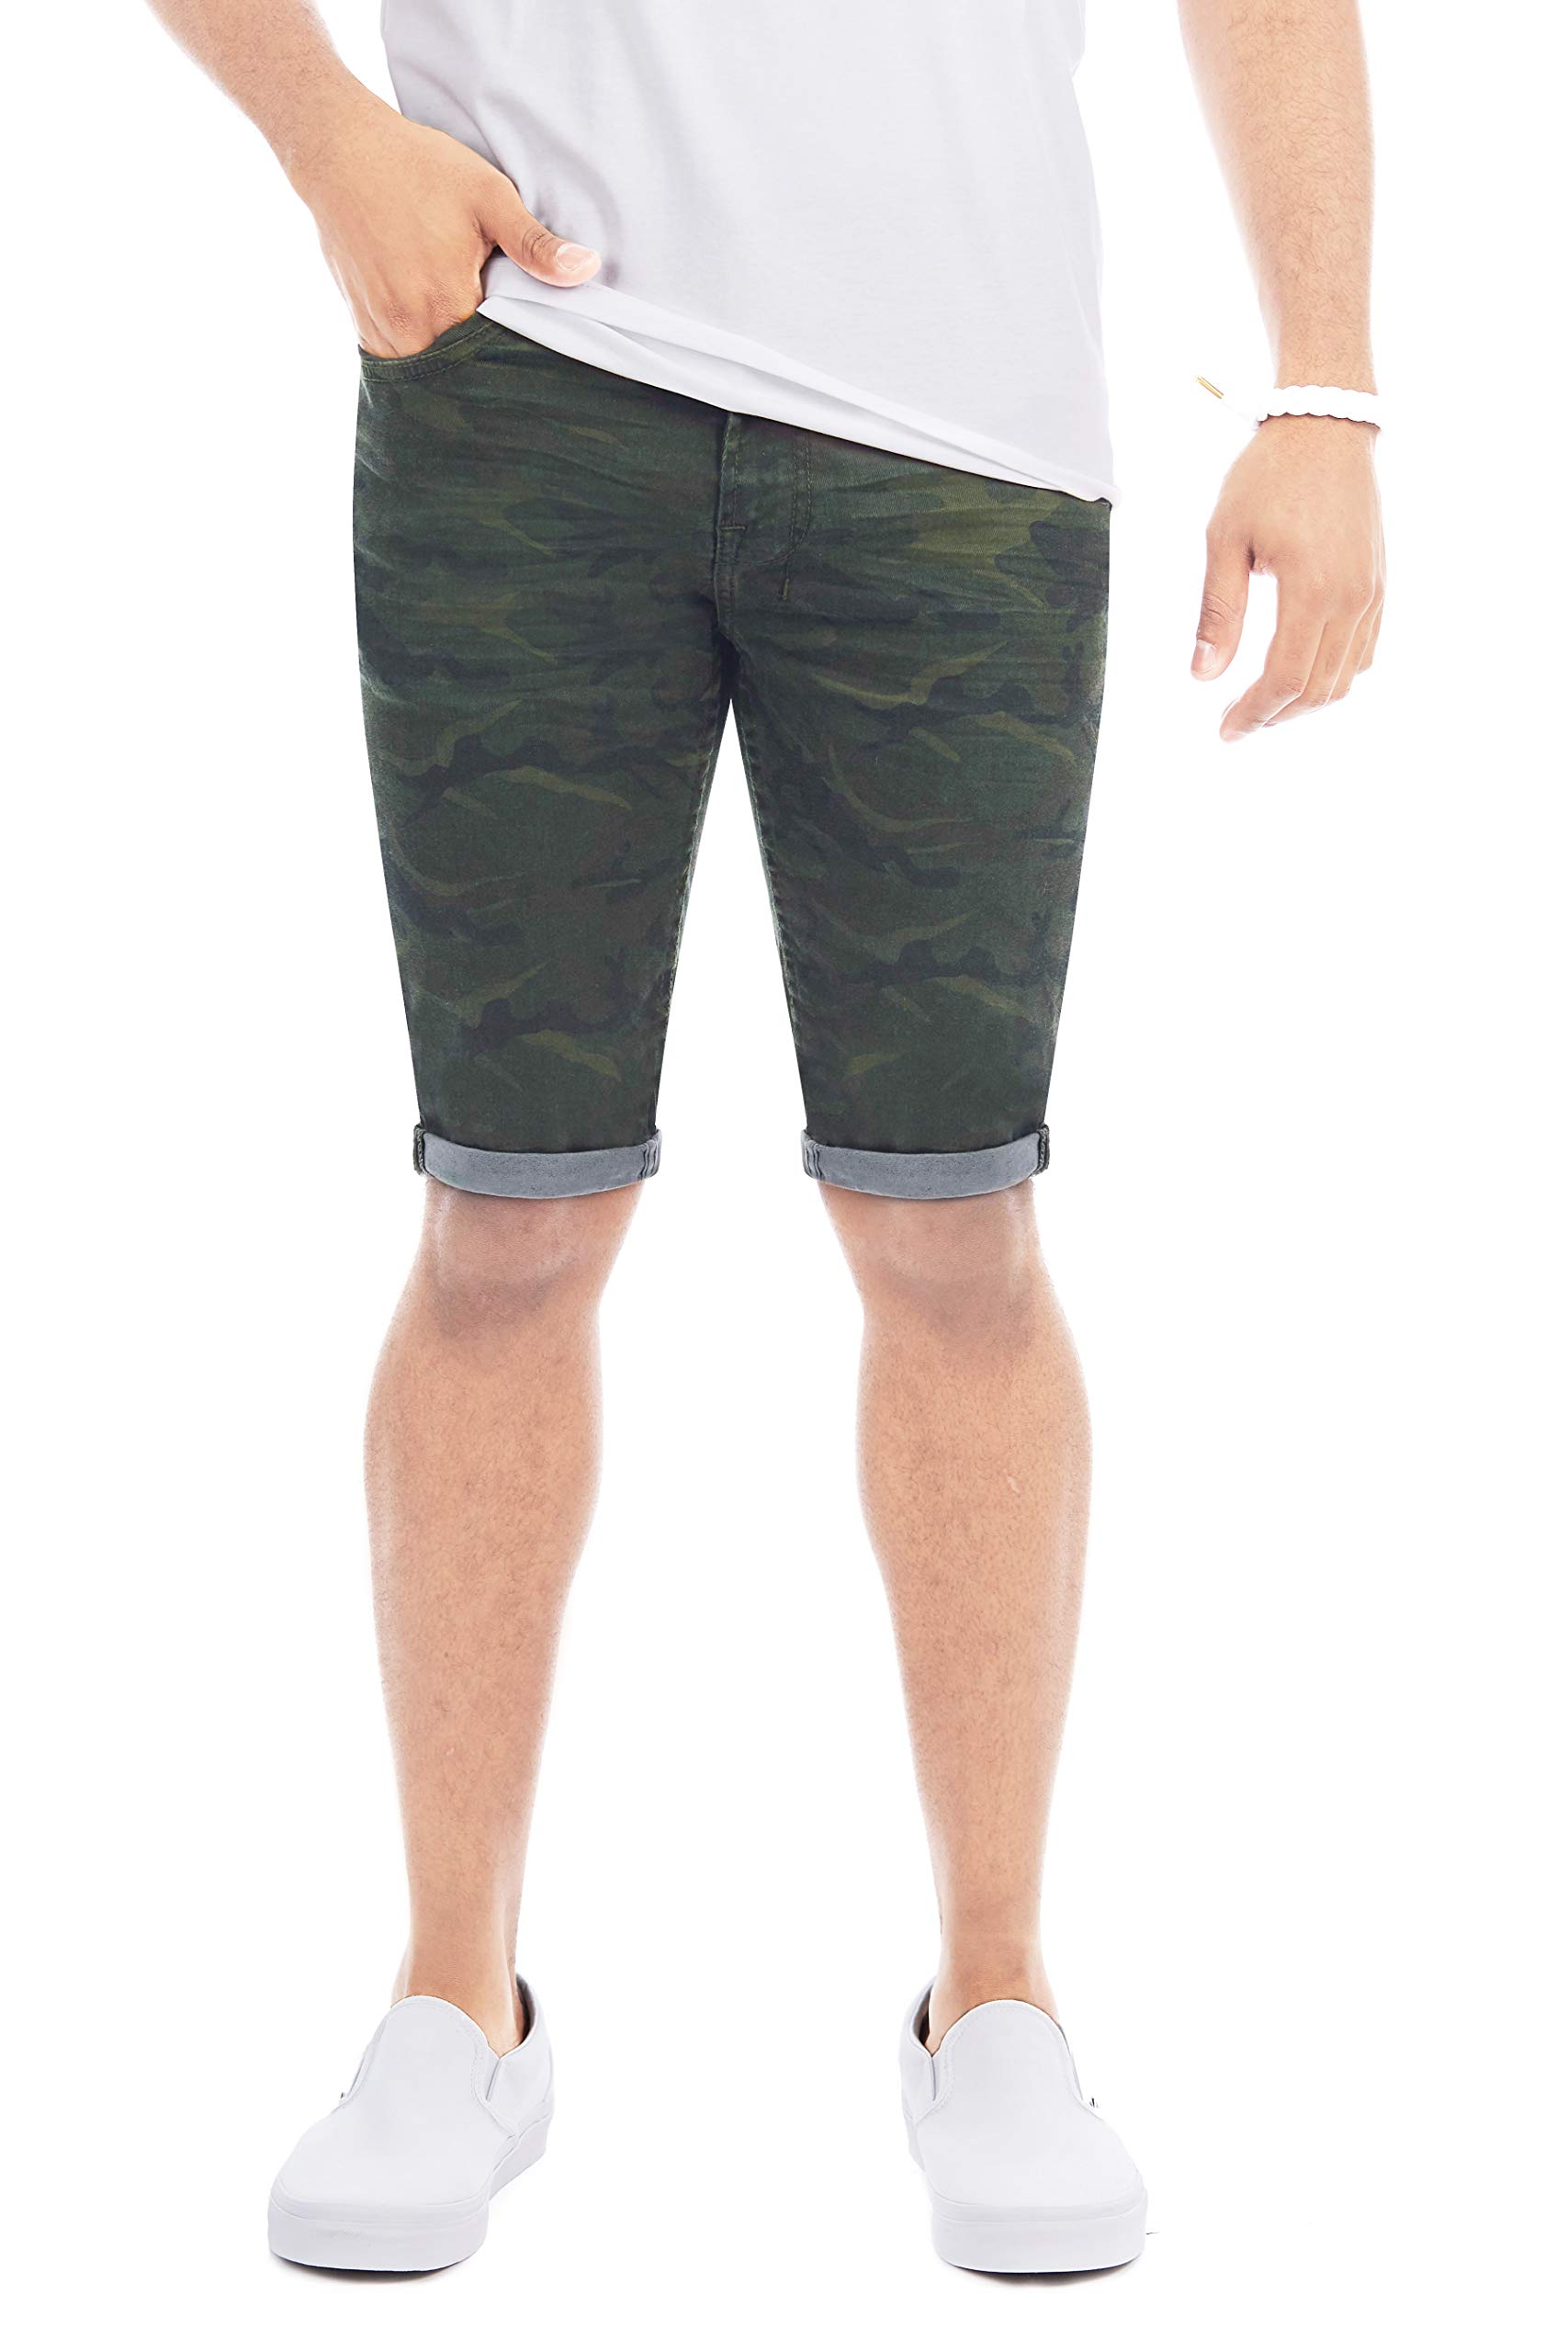 X RAY Men's Rolled Up Denim Shorts, Stretch Slim Skinny Fit, Distressed, Ripped, Bermuda Jeans Short, Olive Camo, Size 38 - image 1 of 6